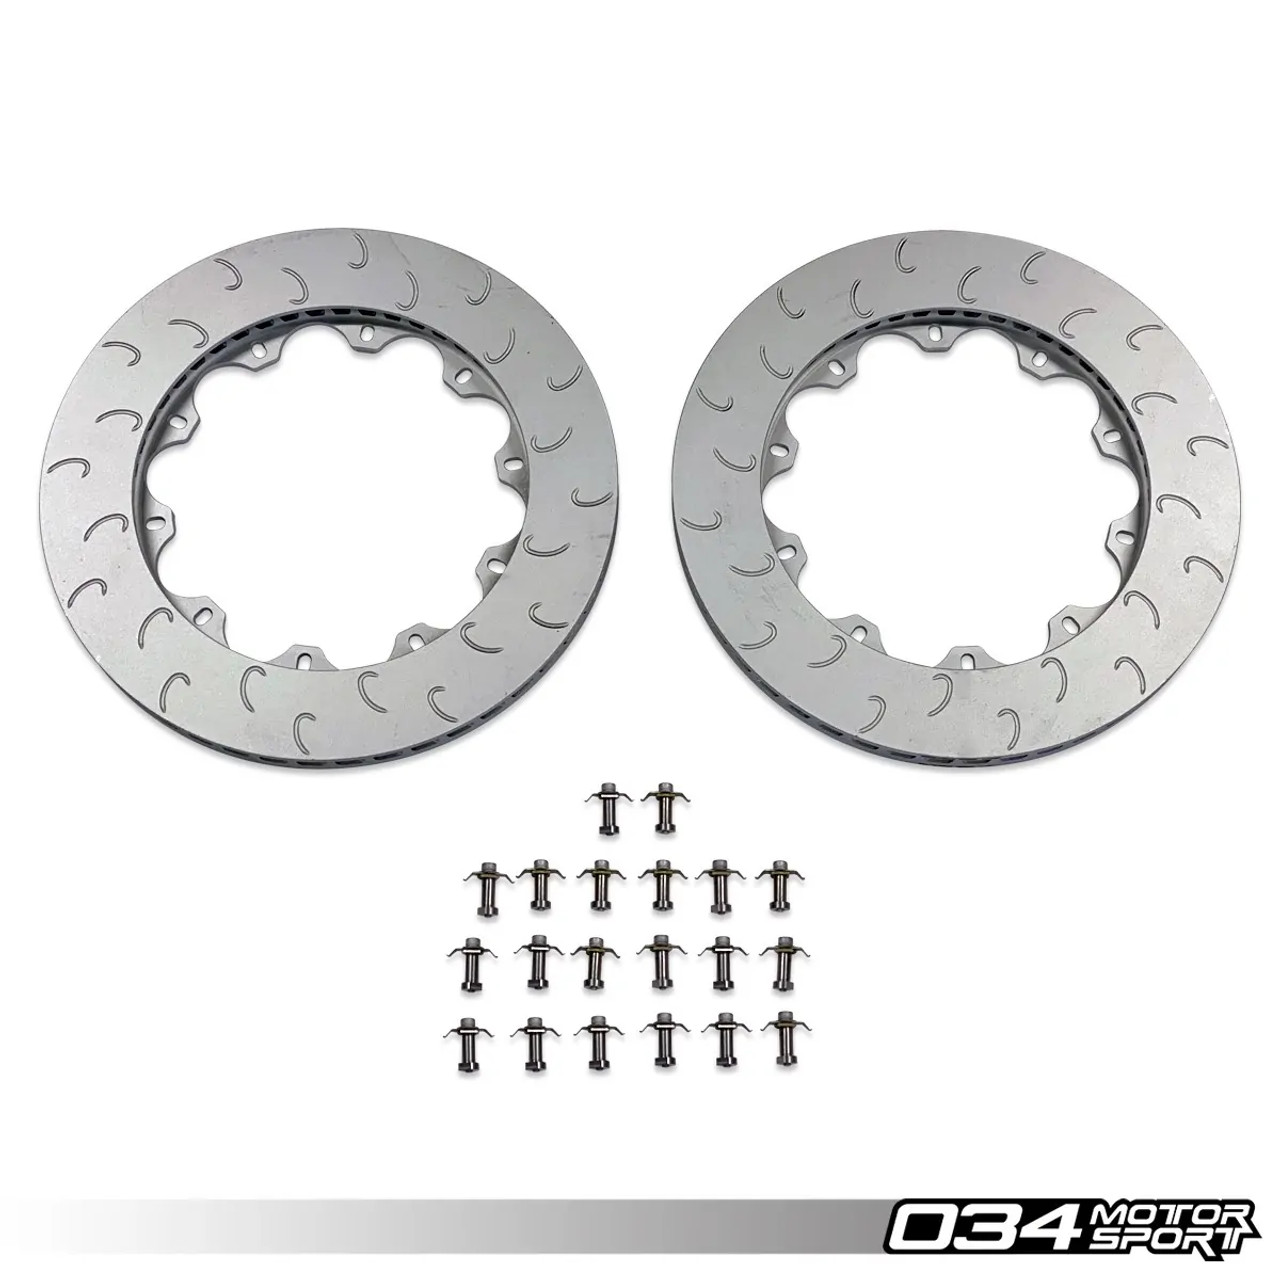 034Motorsport Replacement Rear Rotor Ring Set for C7 S6 & S7